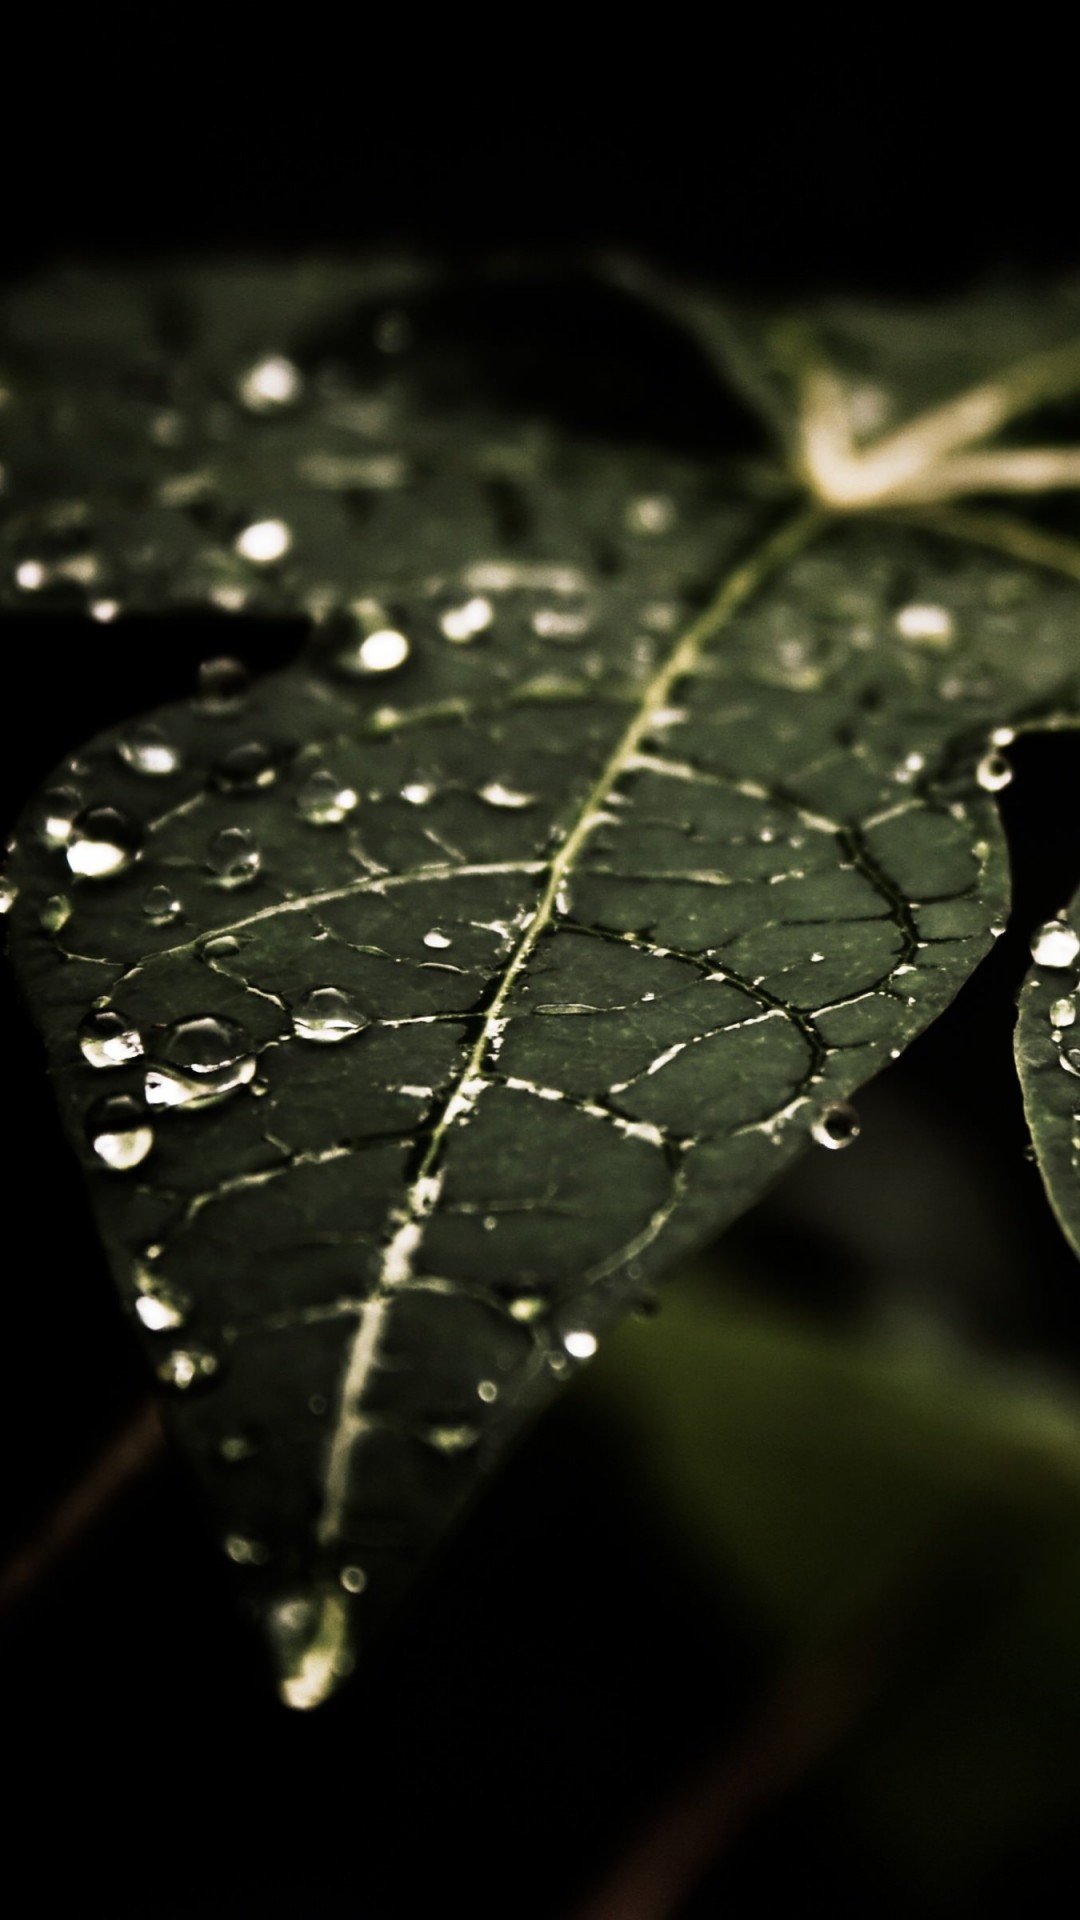 Droplets On Leaves Wallpaper for SONY Xperia Z2